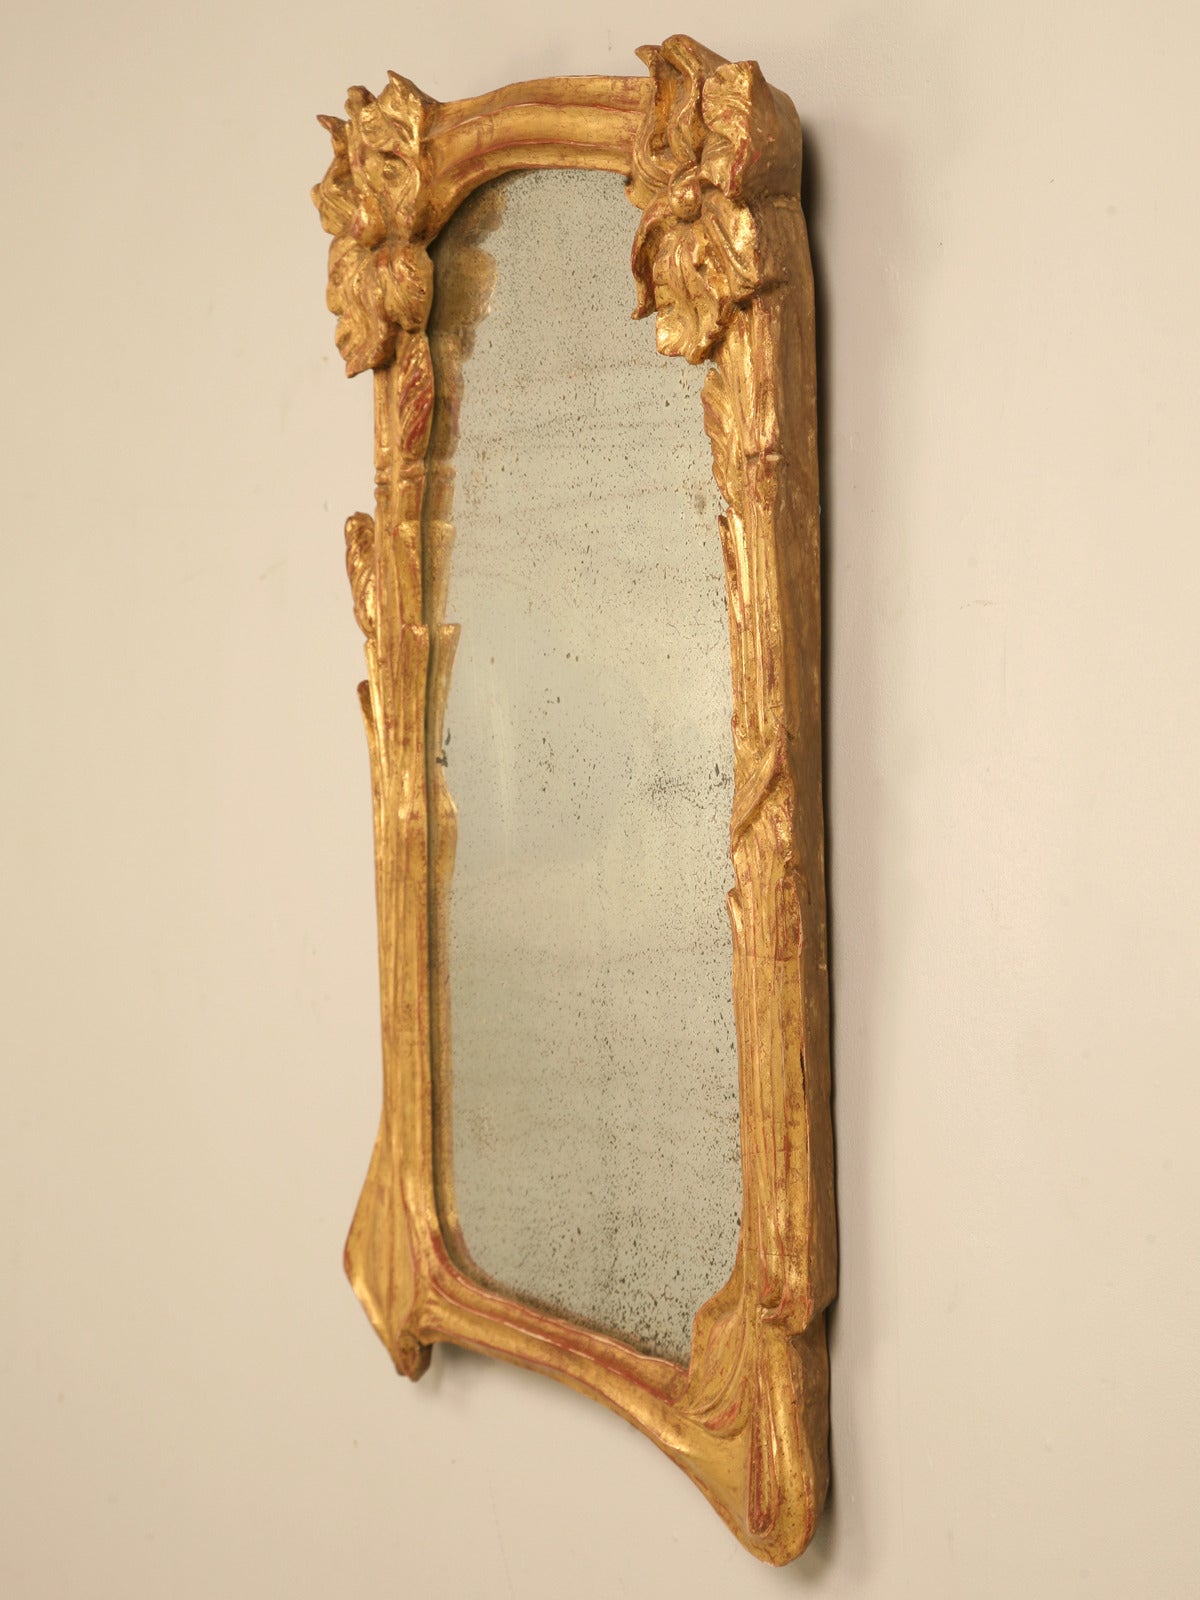 Art Nouveau water gilded mirror with its original glass, circa 1888-1910. The hand-carved wooden frame is in unbelievably good condition and upon close inspection does not require any restoration what-so-ever.